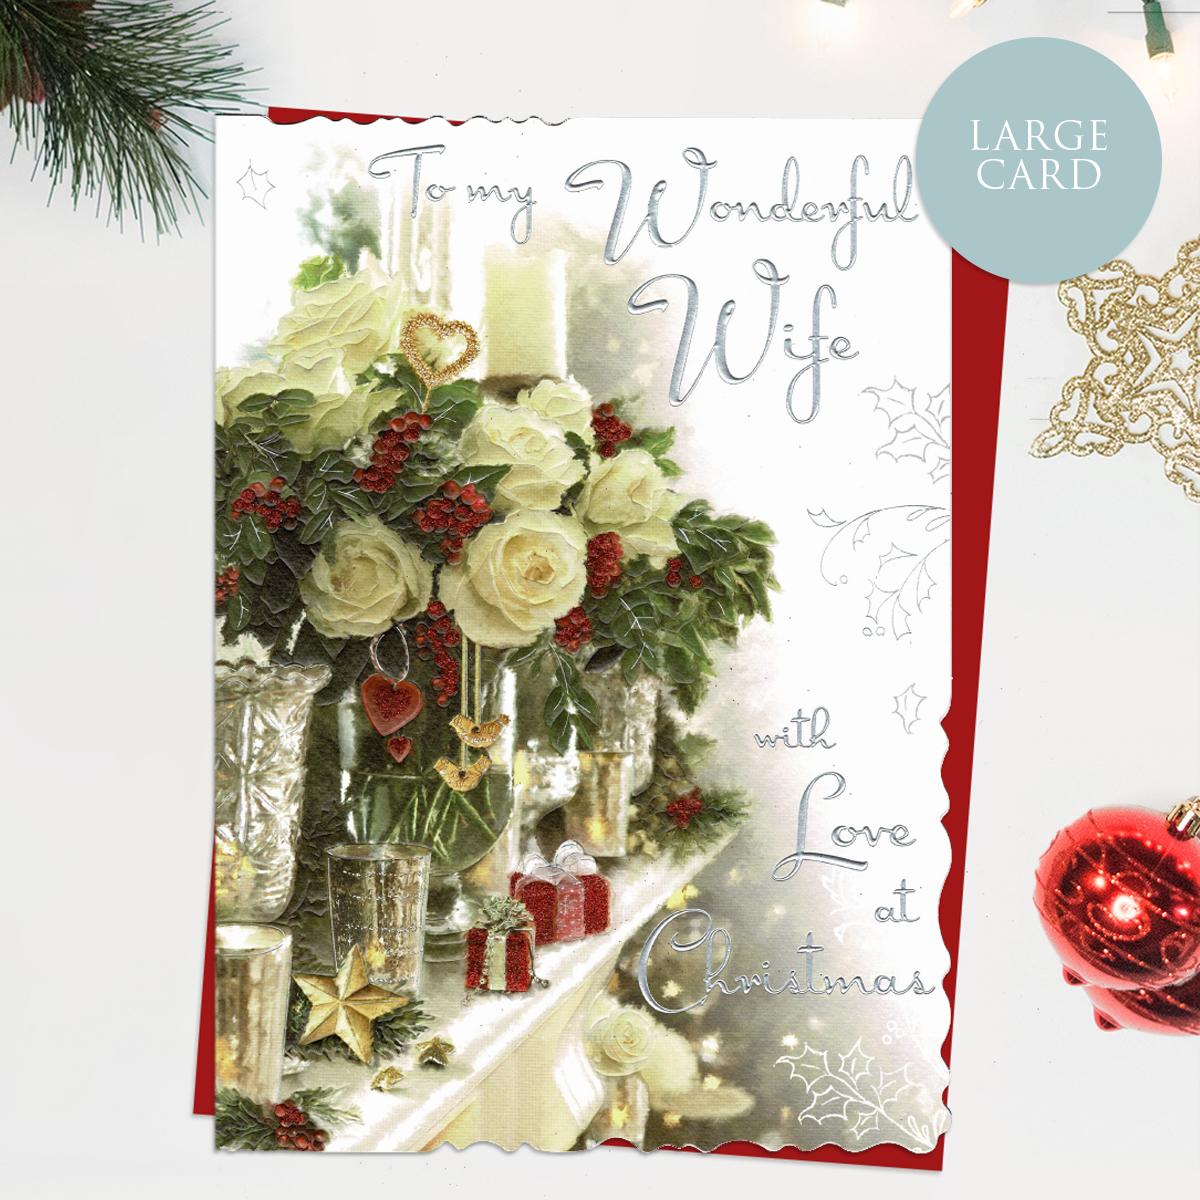 To My Wonderful Wife With Love At Christmas Featuring Fireside Flowers And Wrapped Gifts. Finished With Silver Lettering, Red Glitter And Colour Insert